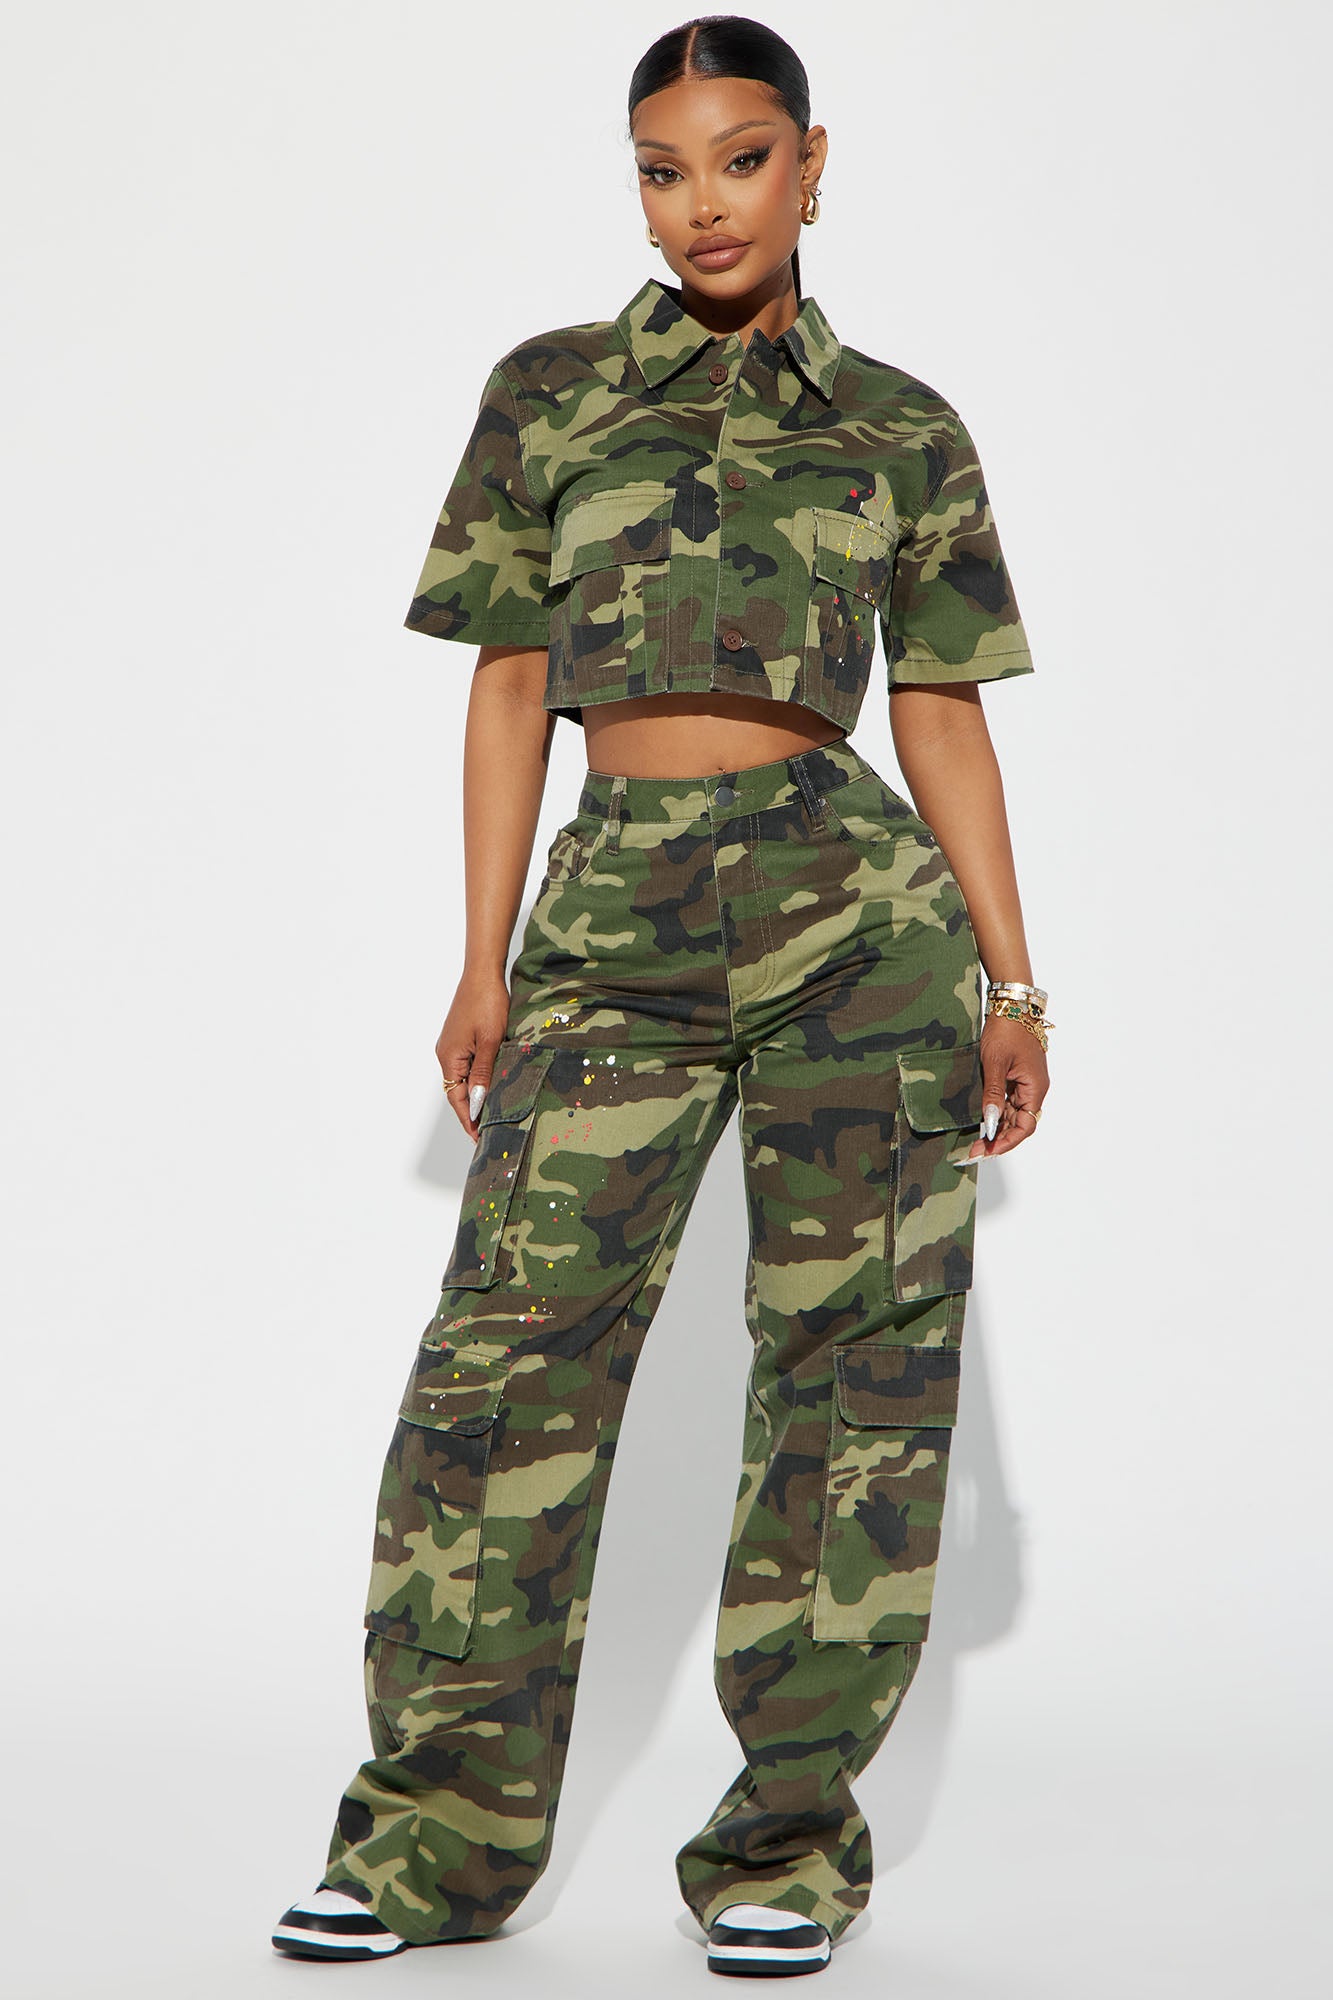 JEKYUARA Women Camo Cargo Pants High Waist Baggy Wide Leg Camouflage Army  Fatigue Joggers Trousers Pocket Sweatpants at Amazon Women's Clothing store